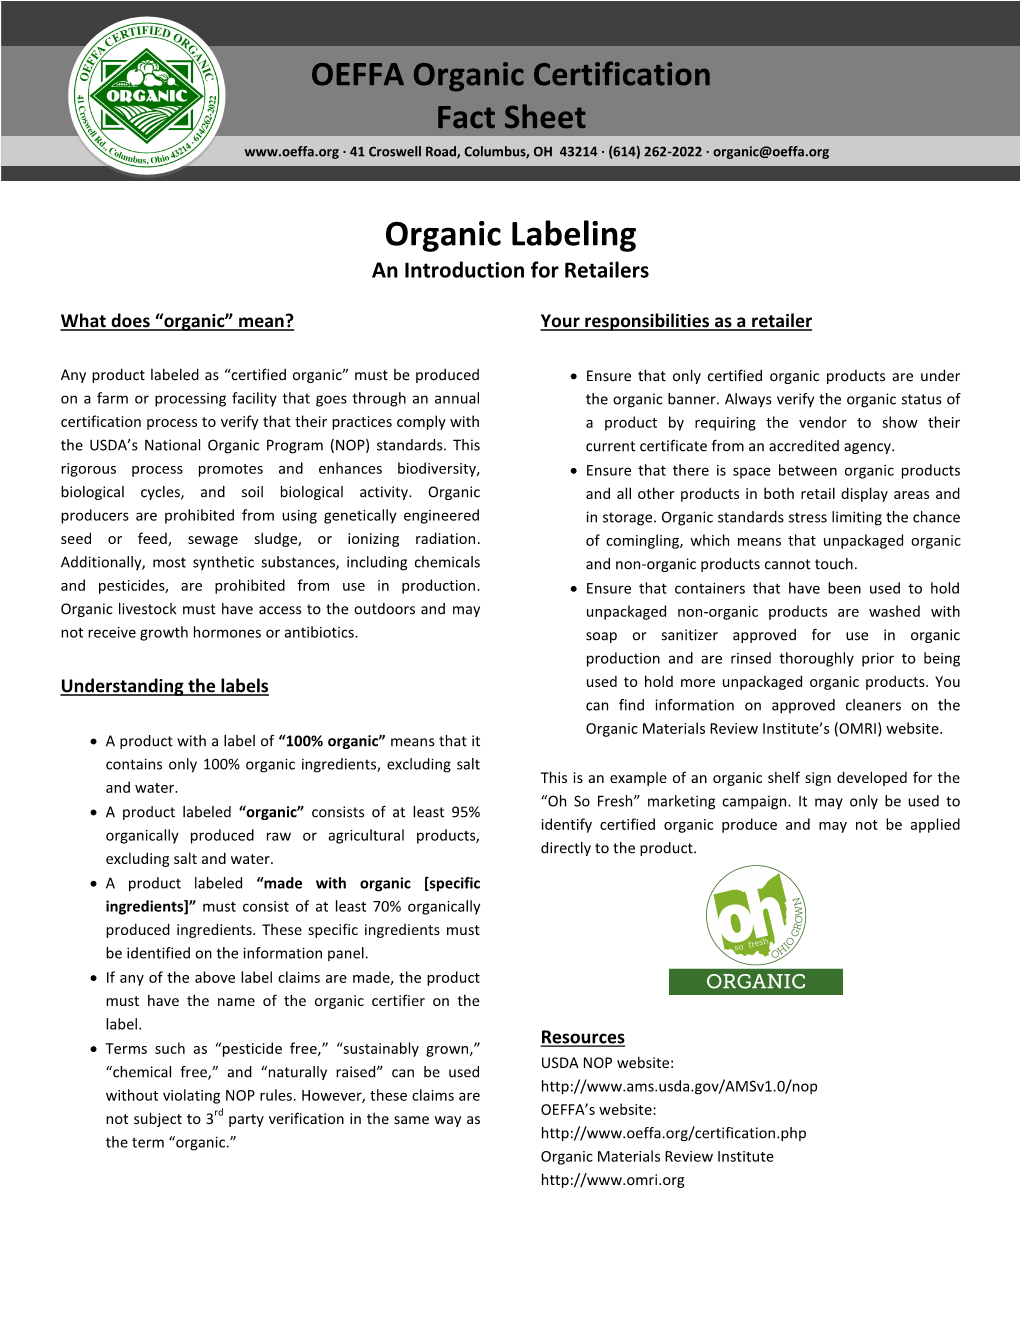 Organic Labeling for Retailers.Pdf